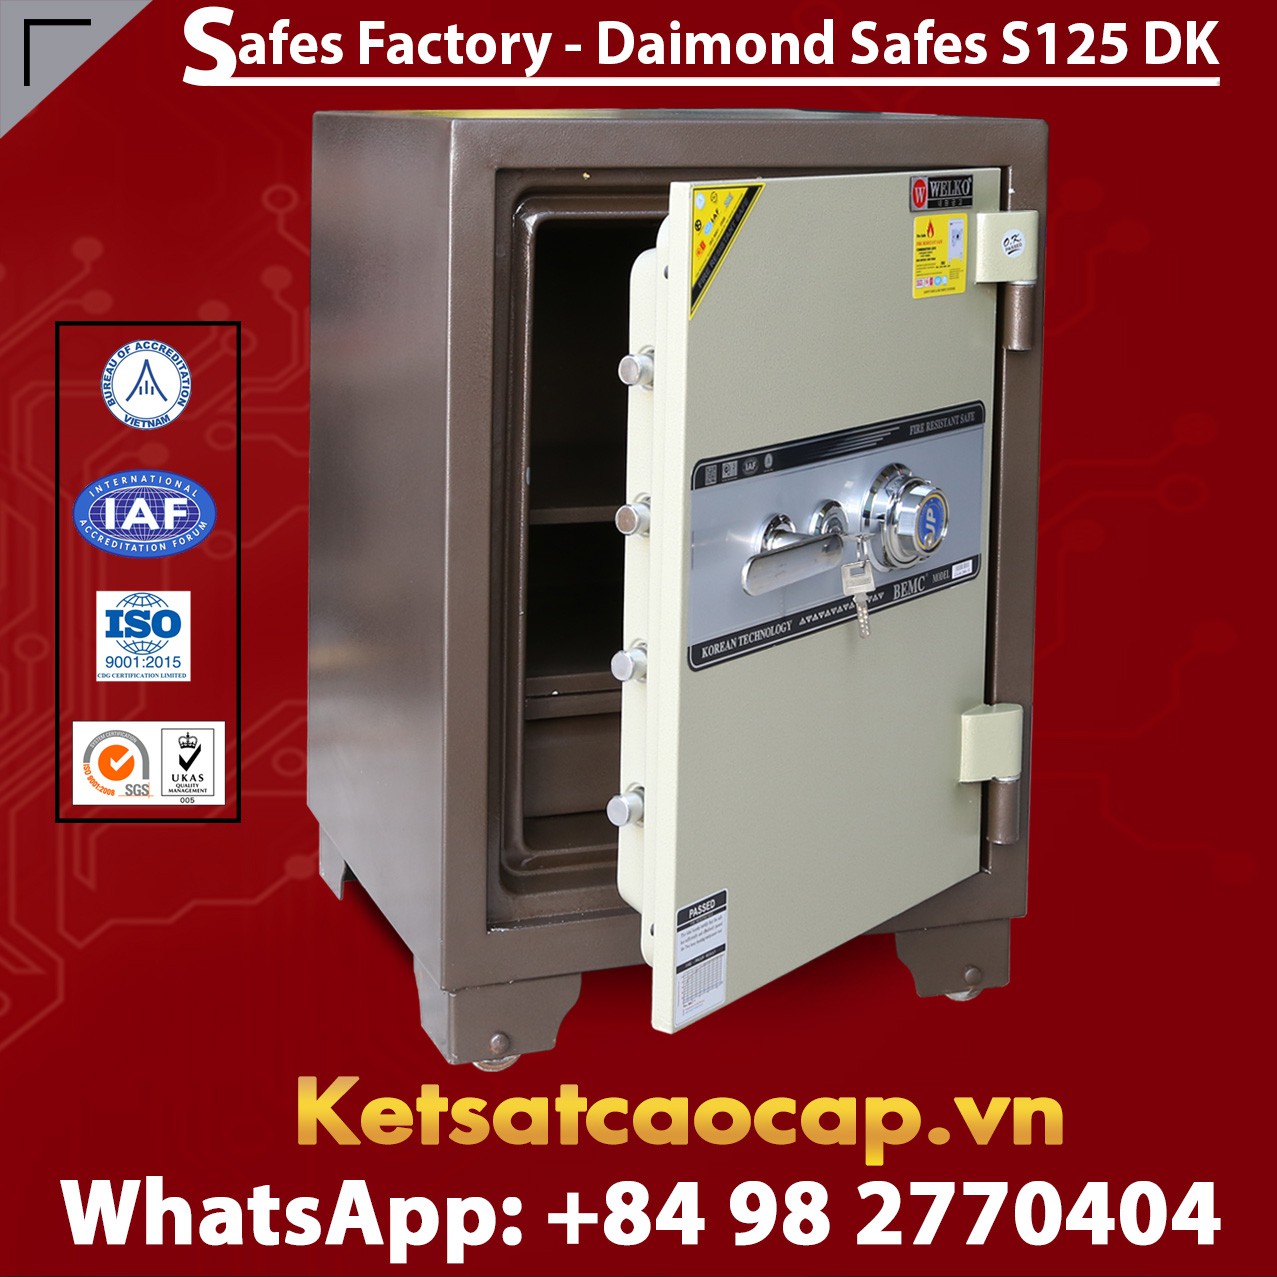 Office Safes High Quality Factory Price uy tín